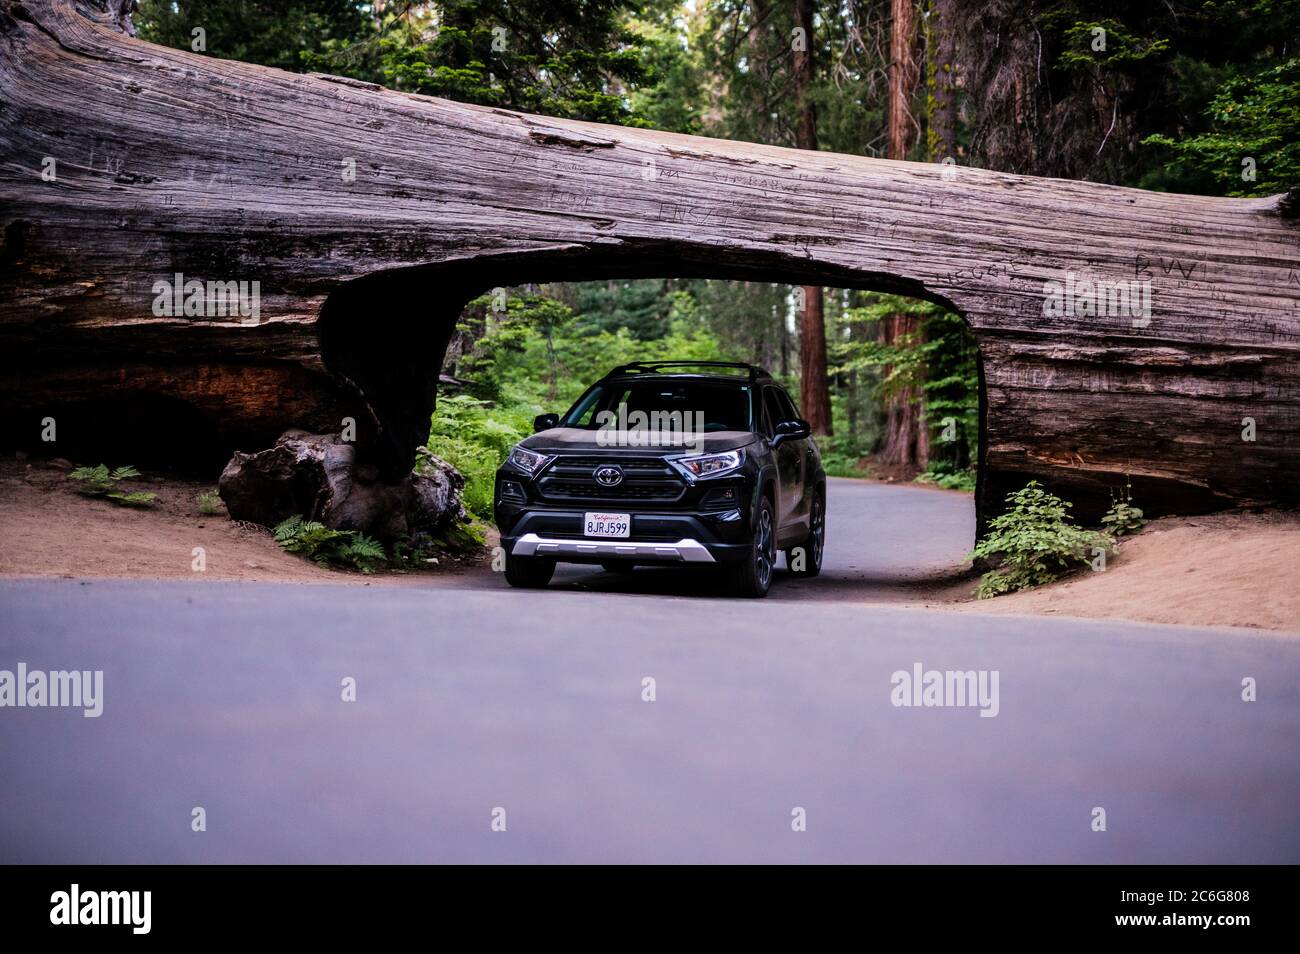 2019 Rav4 Adventure crossing under the Tunnel Log in Sequoia National Park. Stock Photo